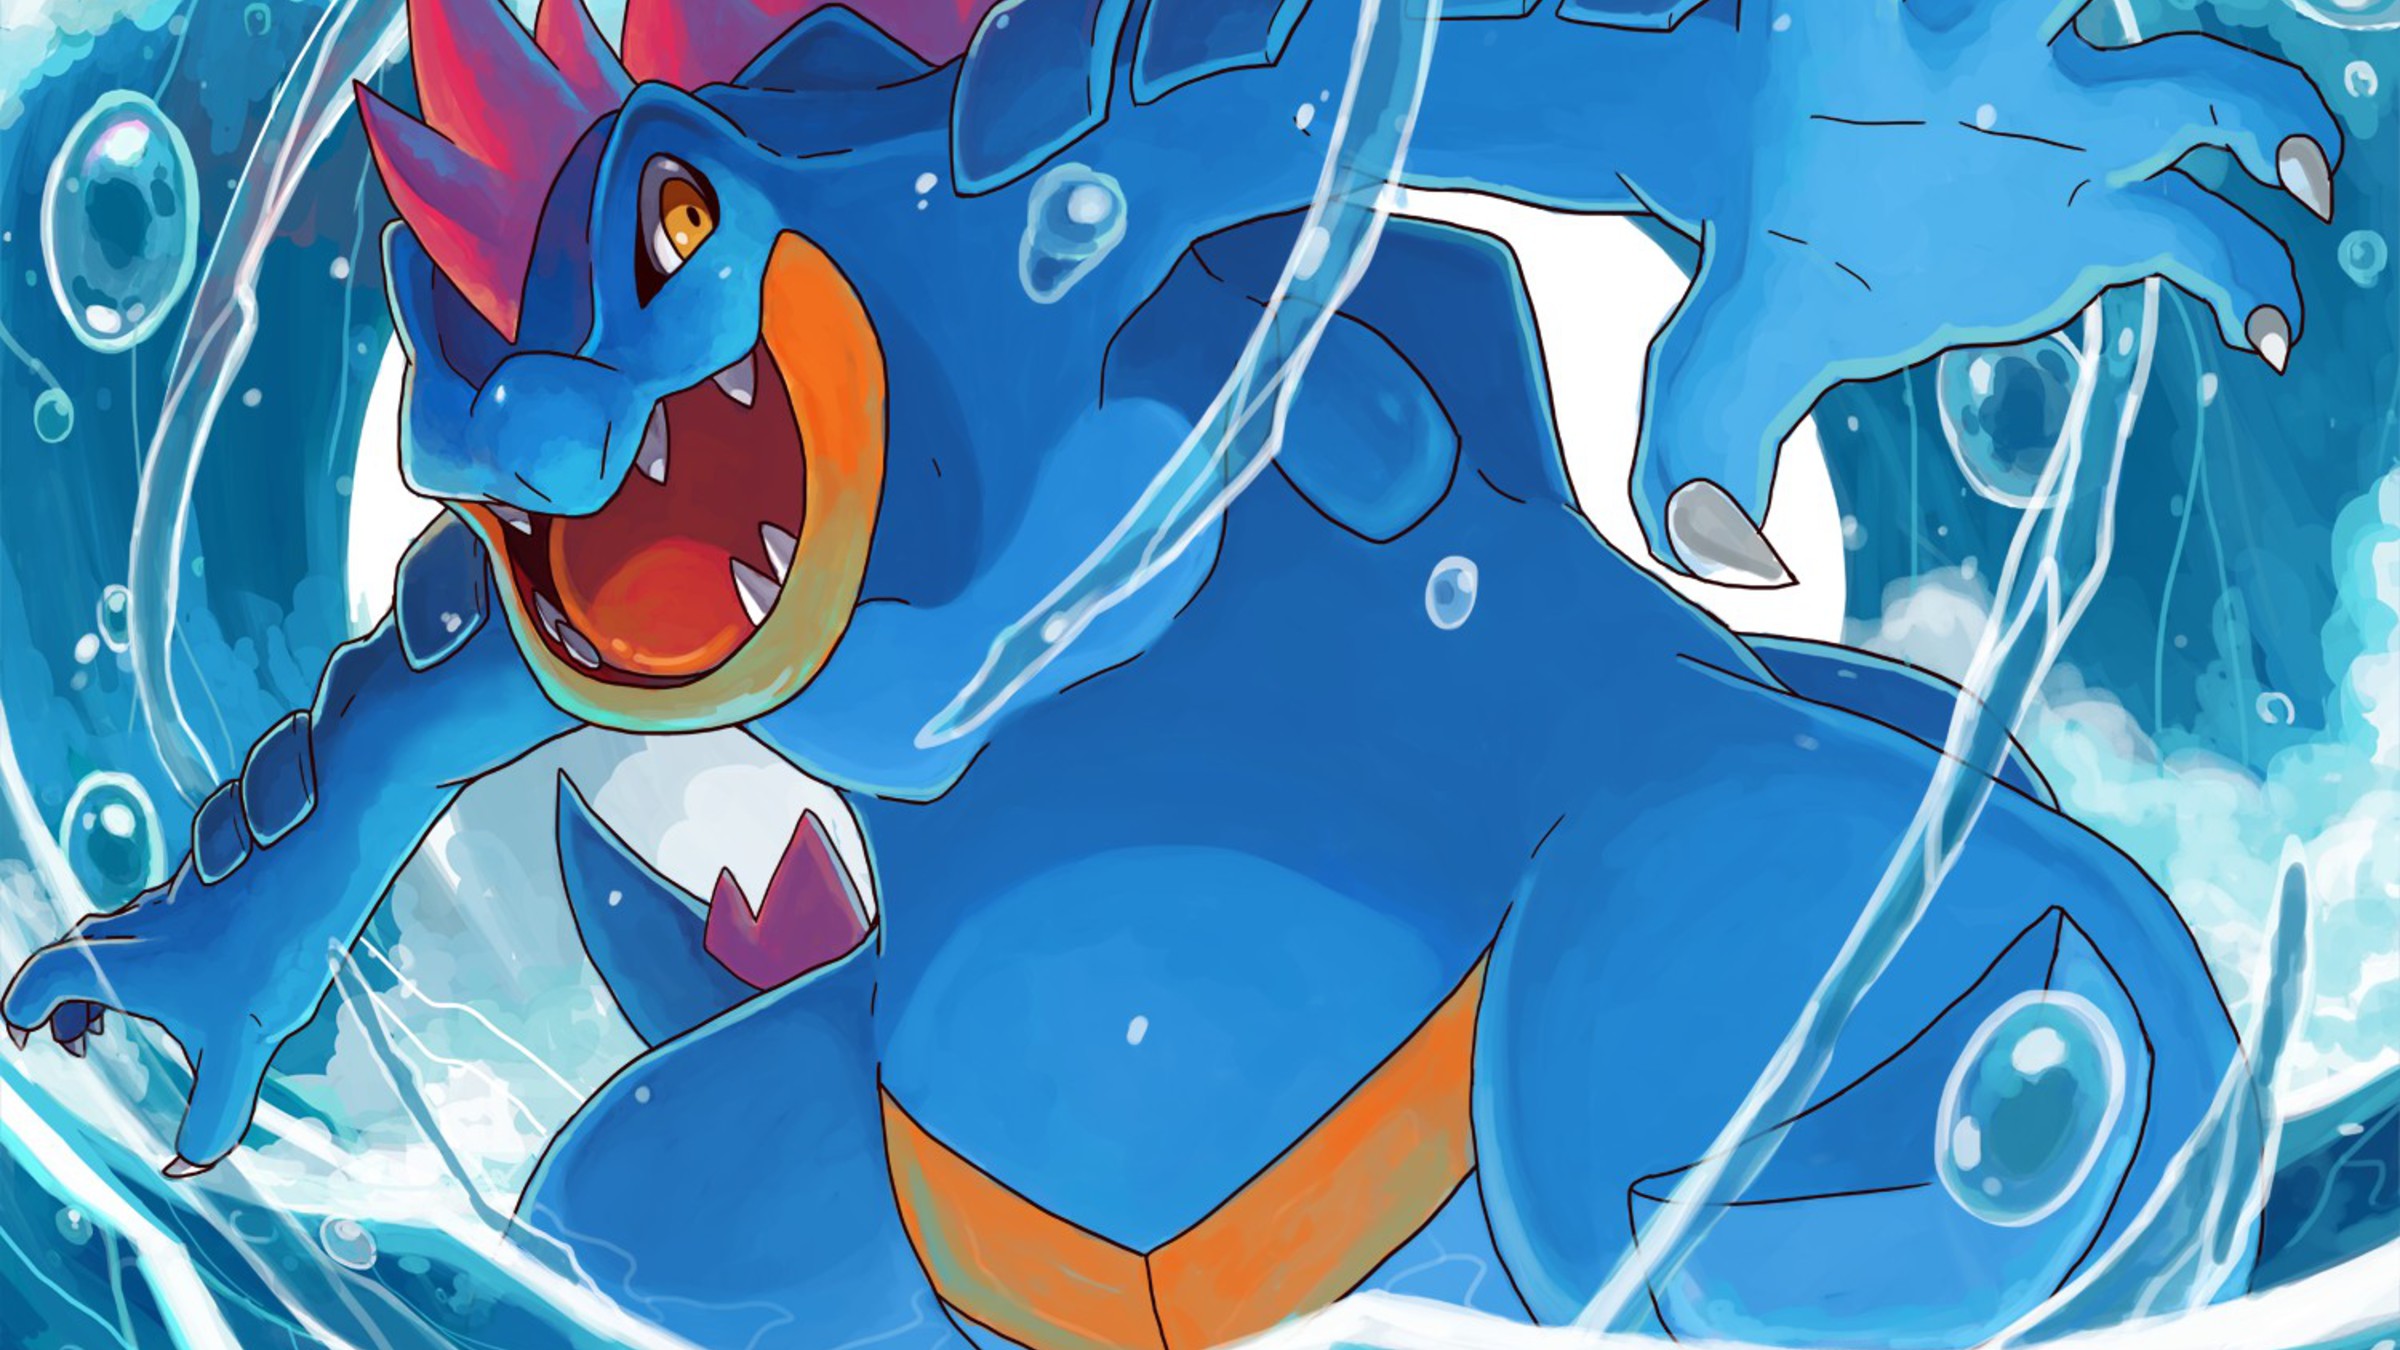 Pokemon GO January Community Day includes Totodile and its evolutions.